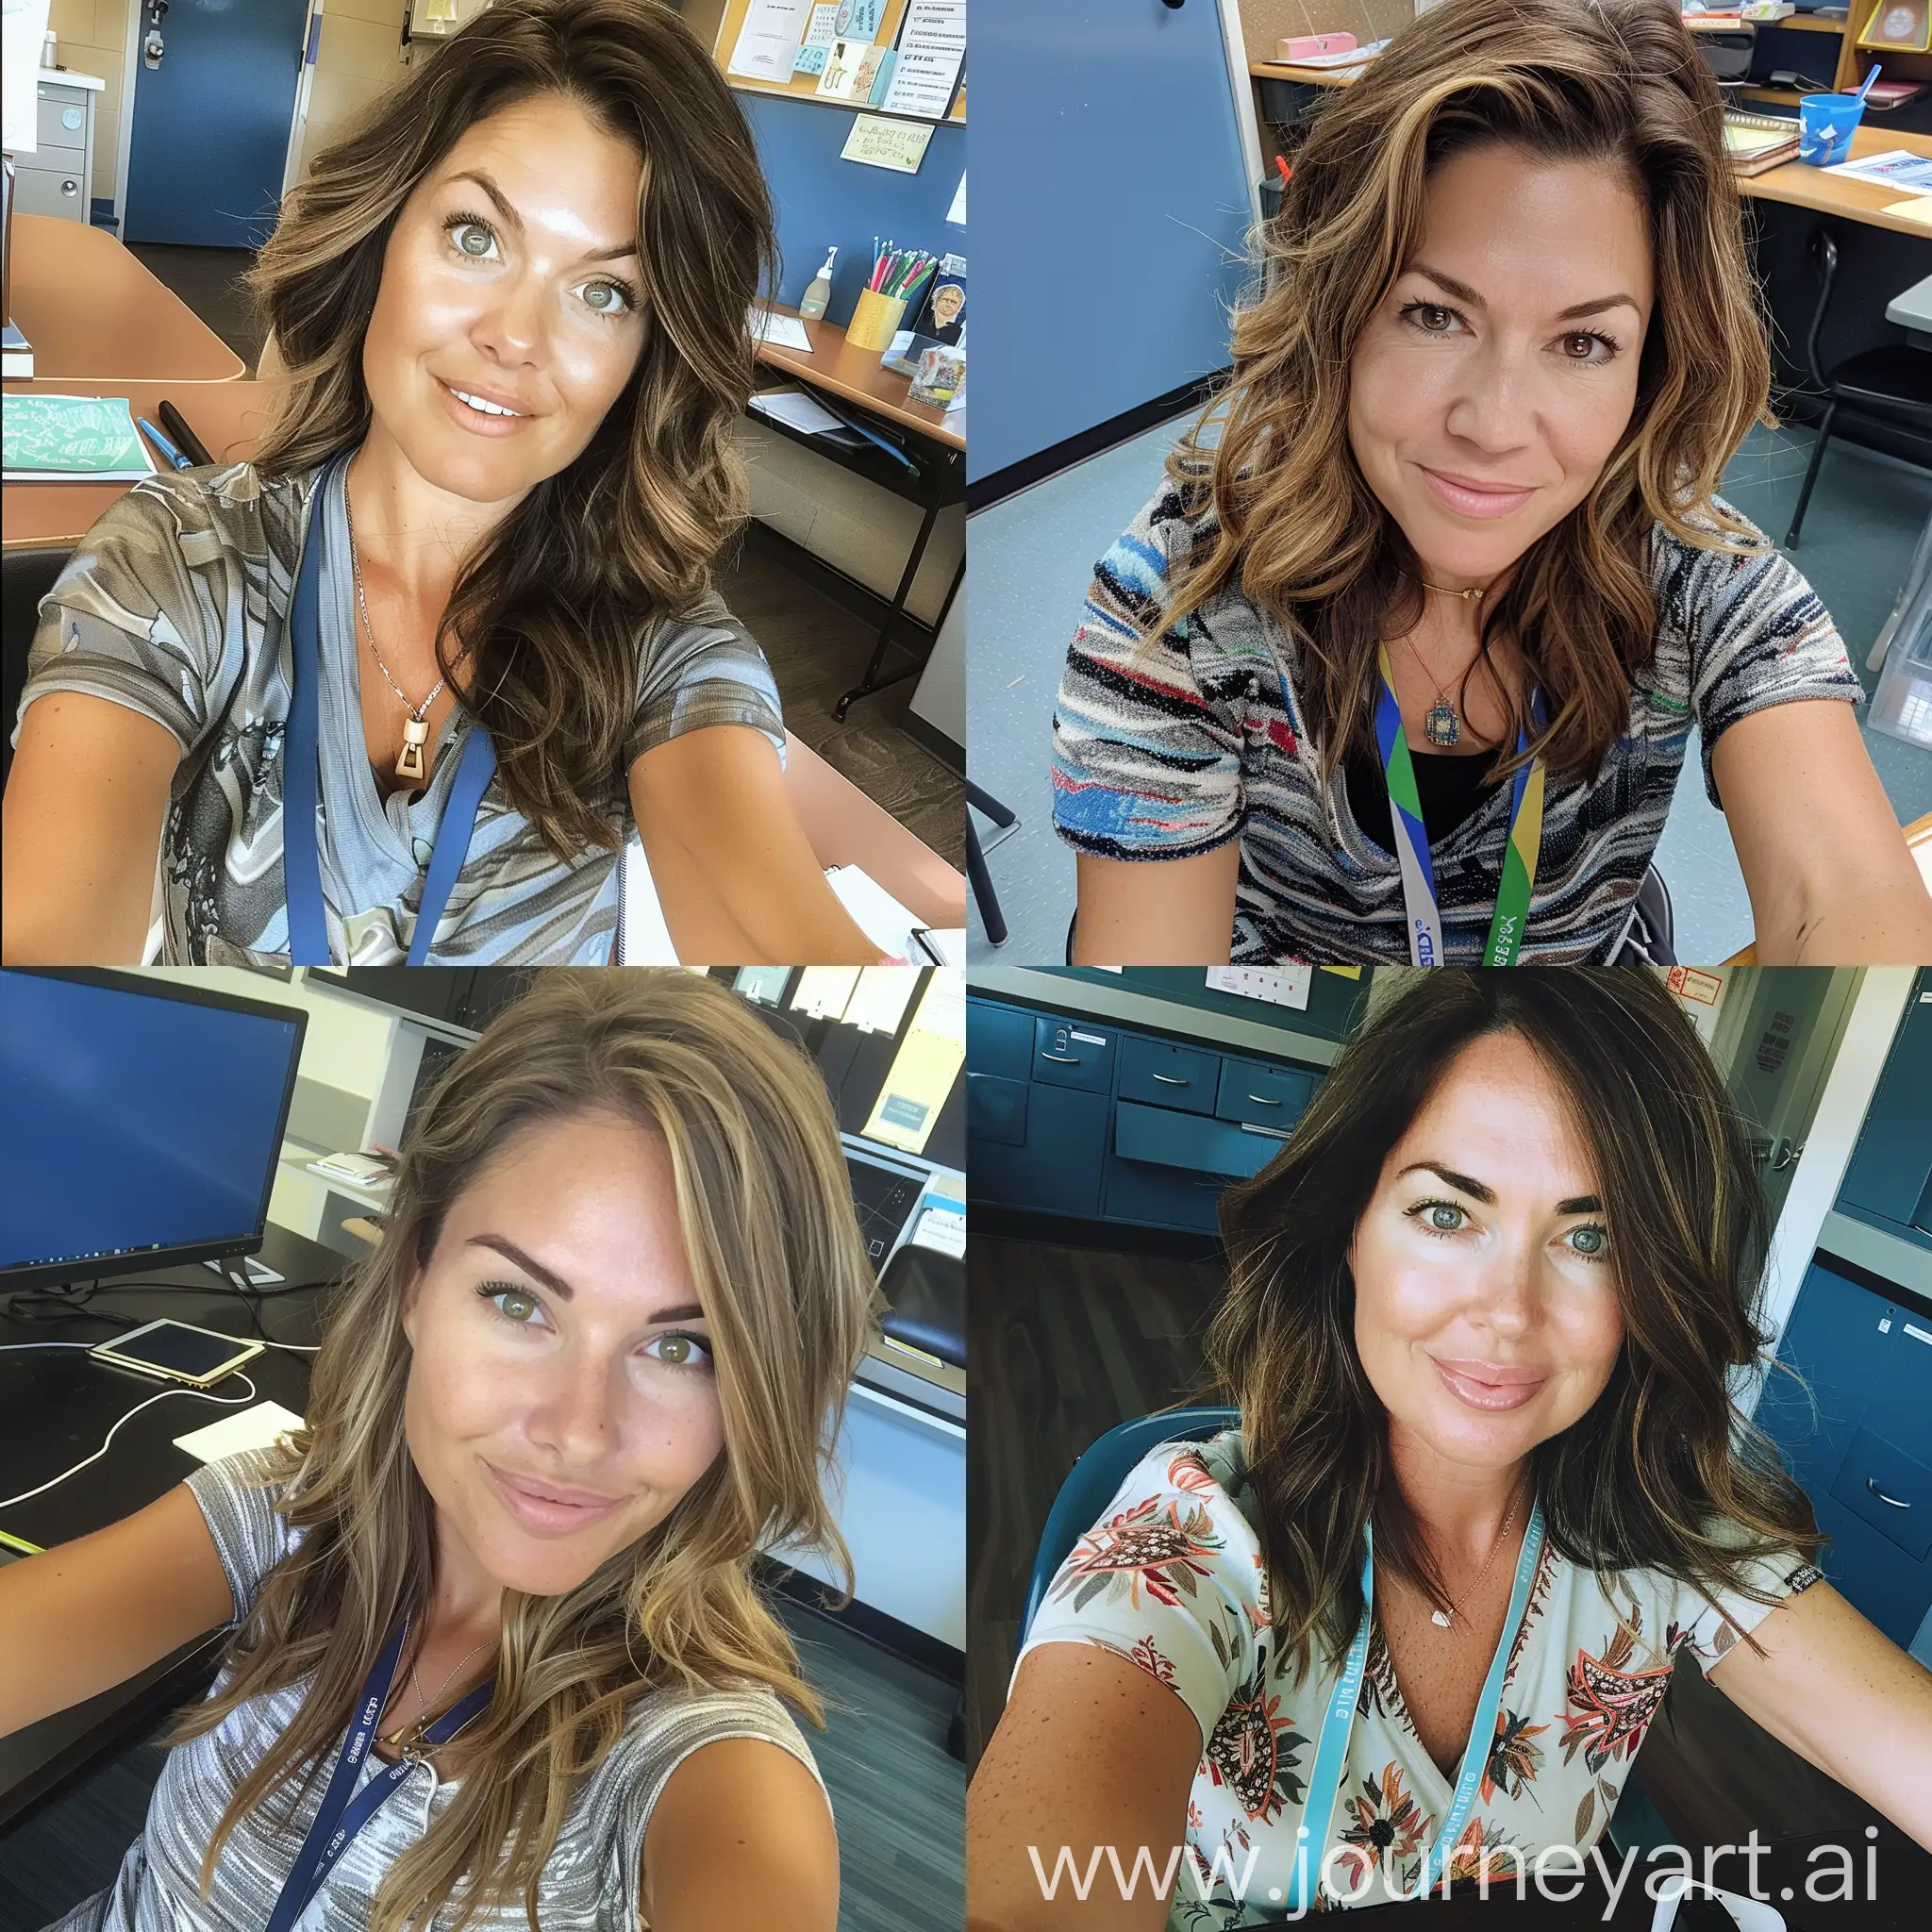 Typical elementary school teacher taking a selfie at her desk, super model face, casual clothes, large, lanyard around neck, close up selfie